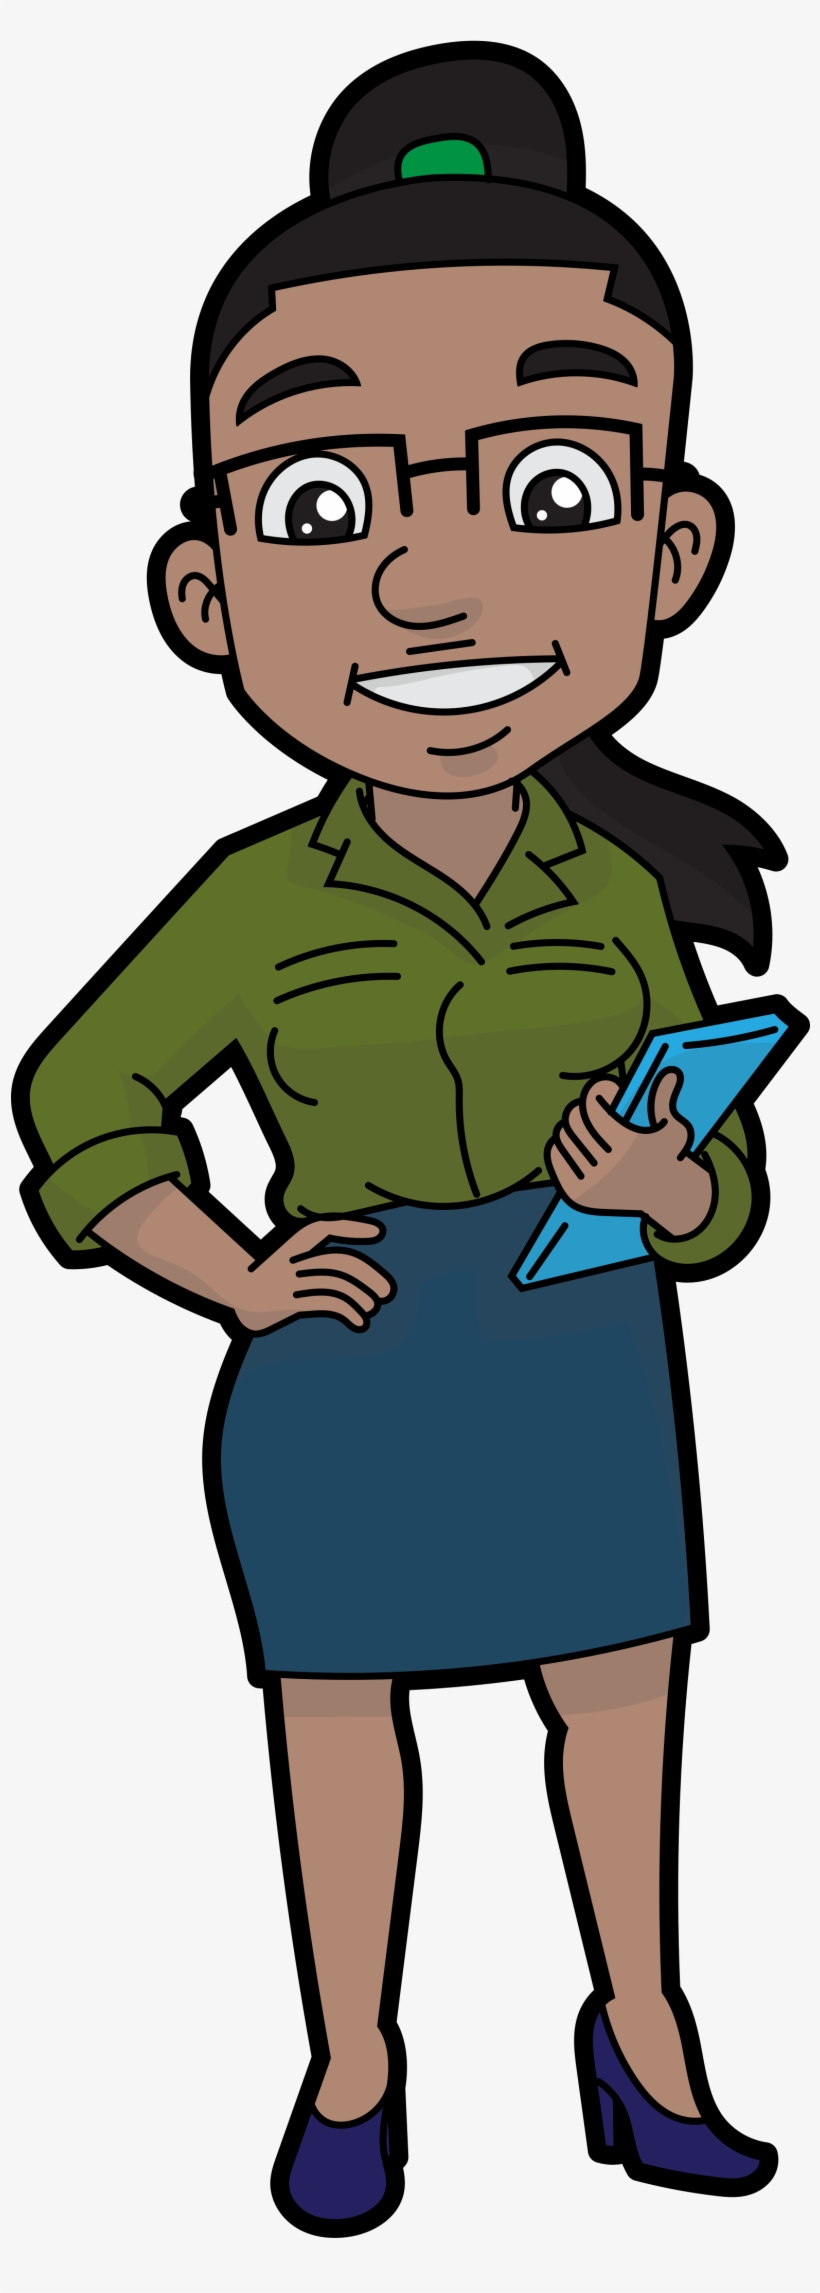 Open - Cartoon Black Woman Png - Free Transparent PNG Download - PNGkey